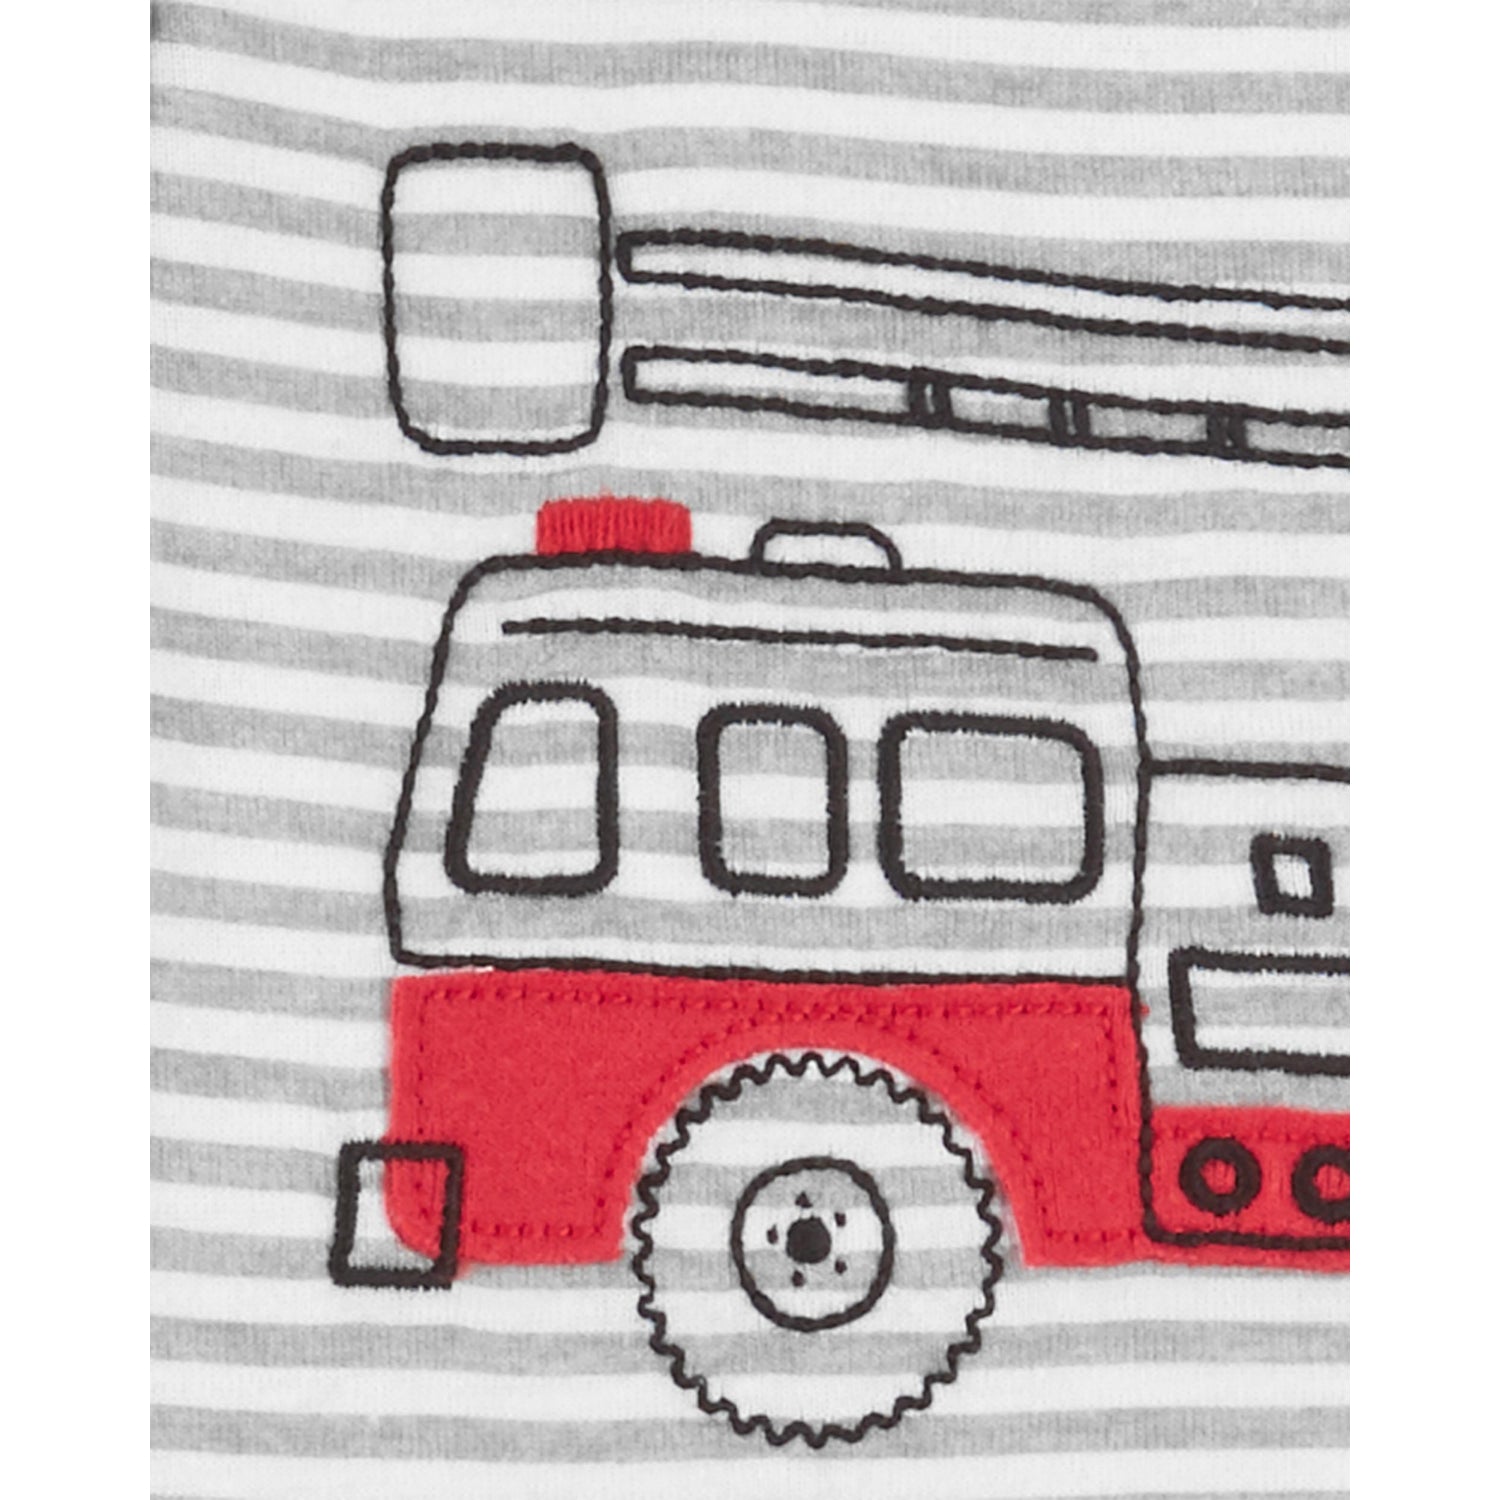 Carters Boys 2T-5T 1-Piece Footed Fire Truck Pajamas